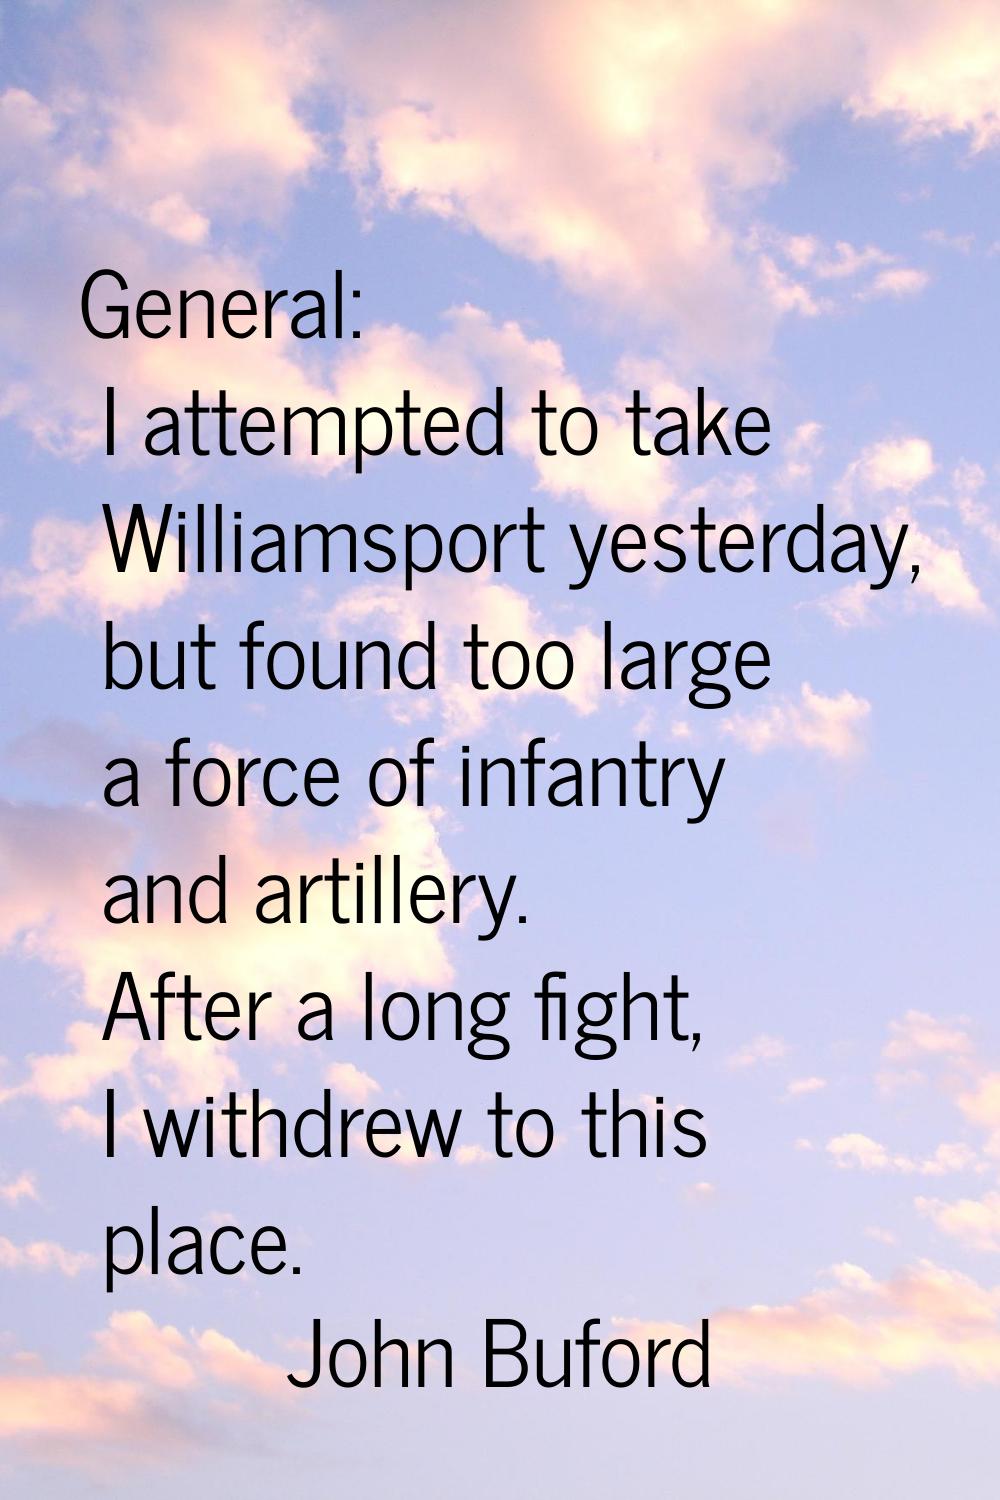 General: I attempted to take Williamsport yesterday, but found too large a force of infantry and ar